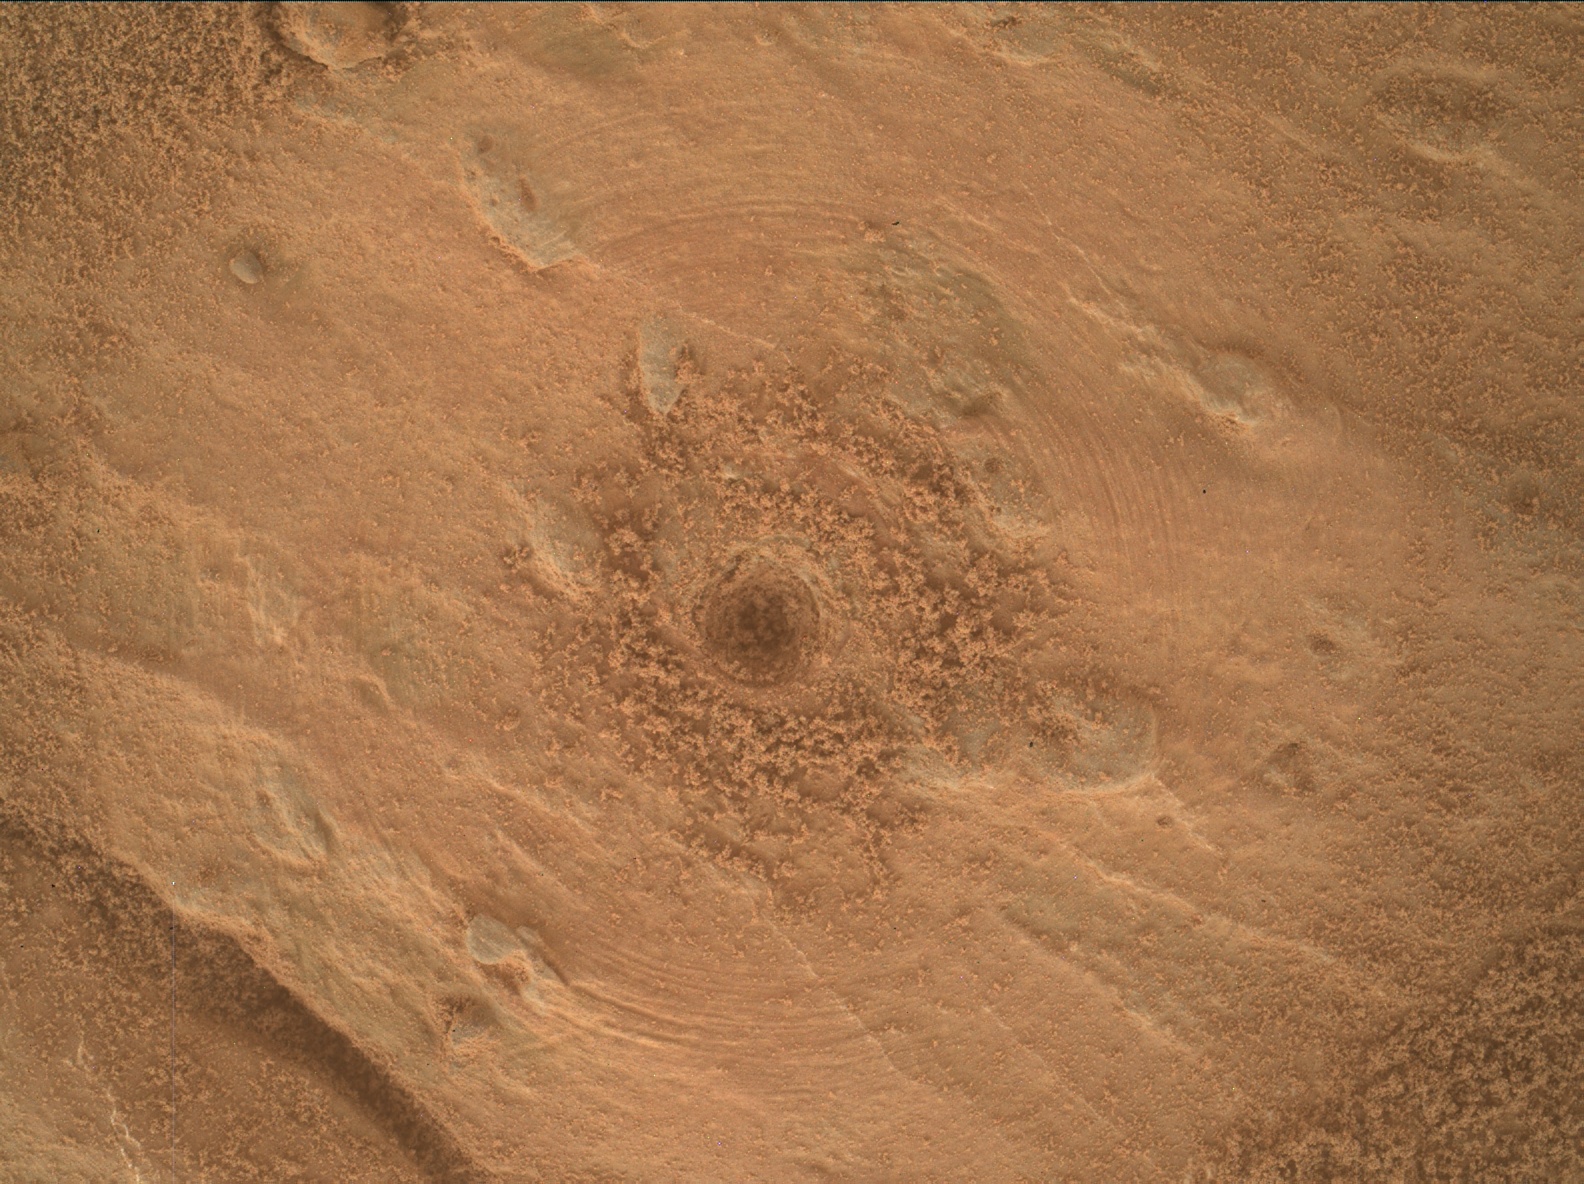 Nasa's Mars rover Curiosity acquired this image using its Mars Hand Lens Imager (MAHLI) on Sol 3203